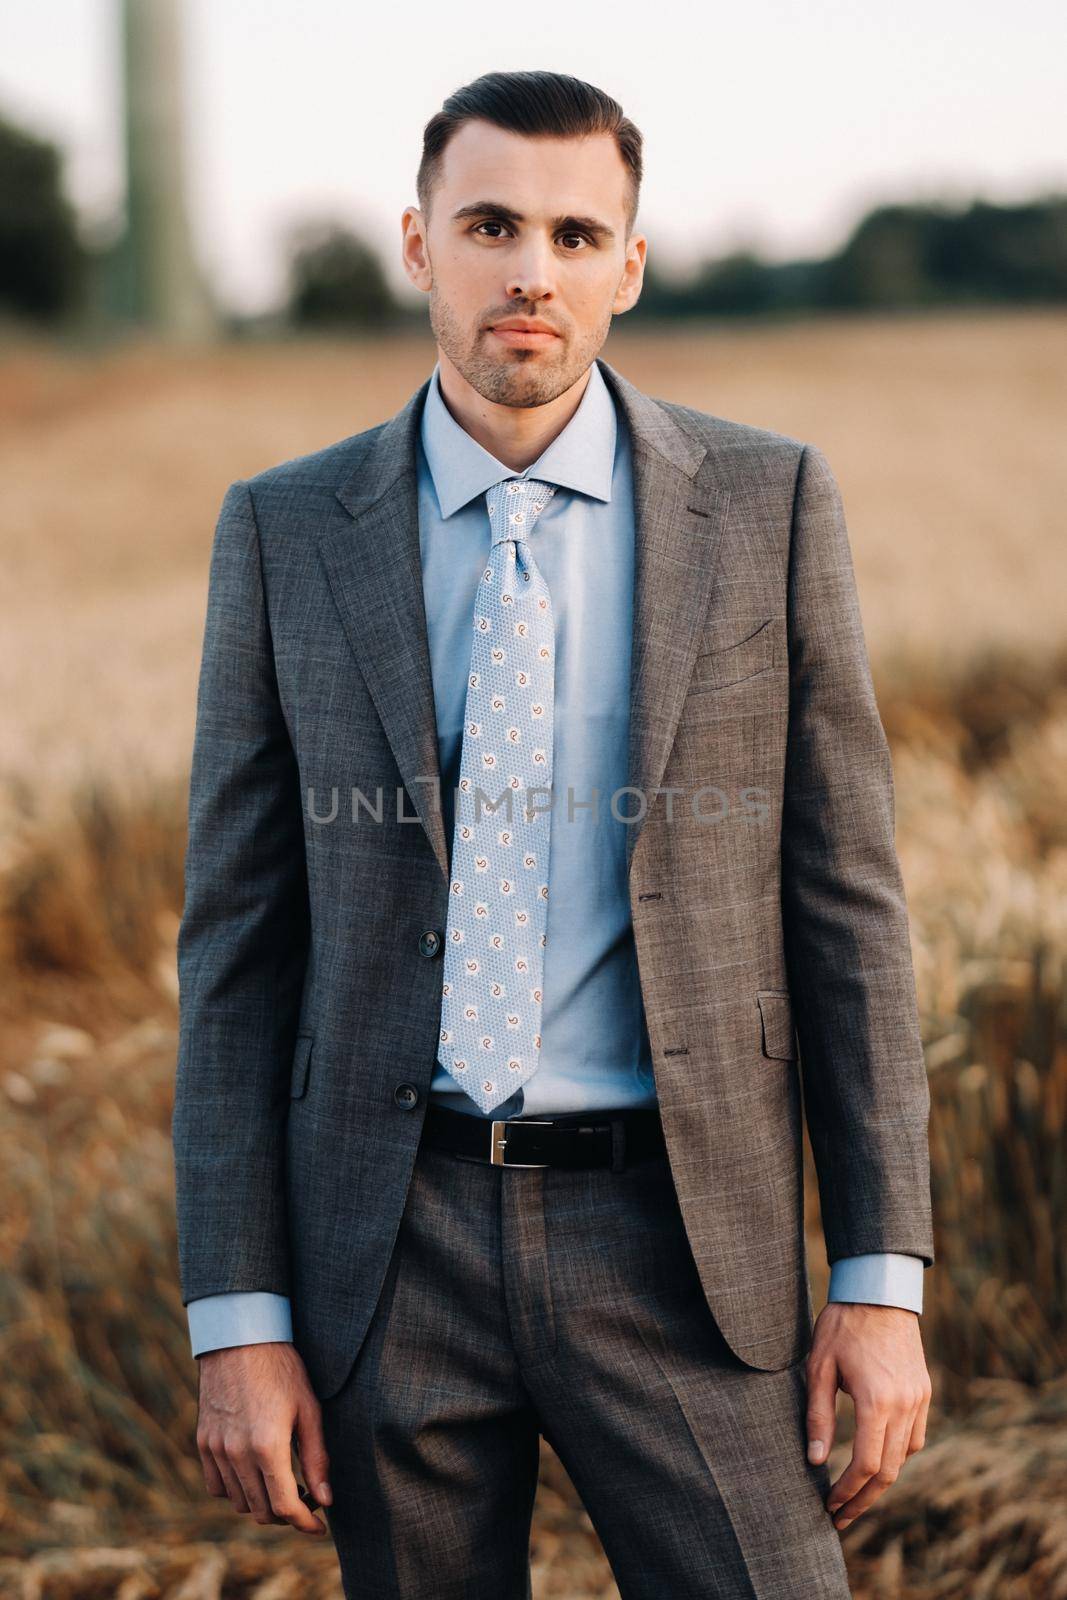 Portrait of a businessman in a gray suit in a wheat field.A man in nature in a jacket and tie.